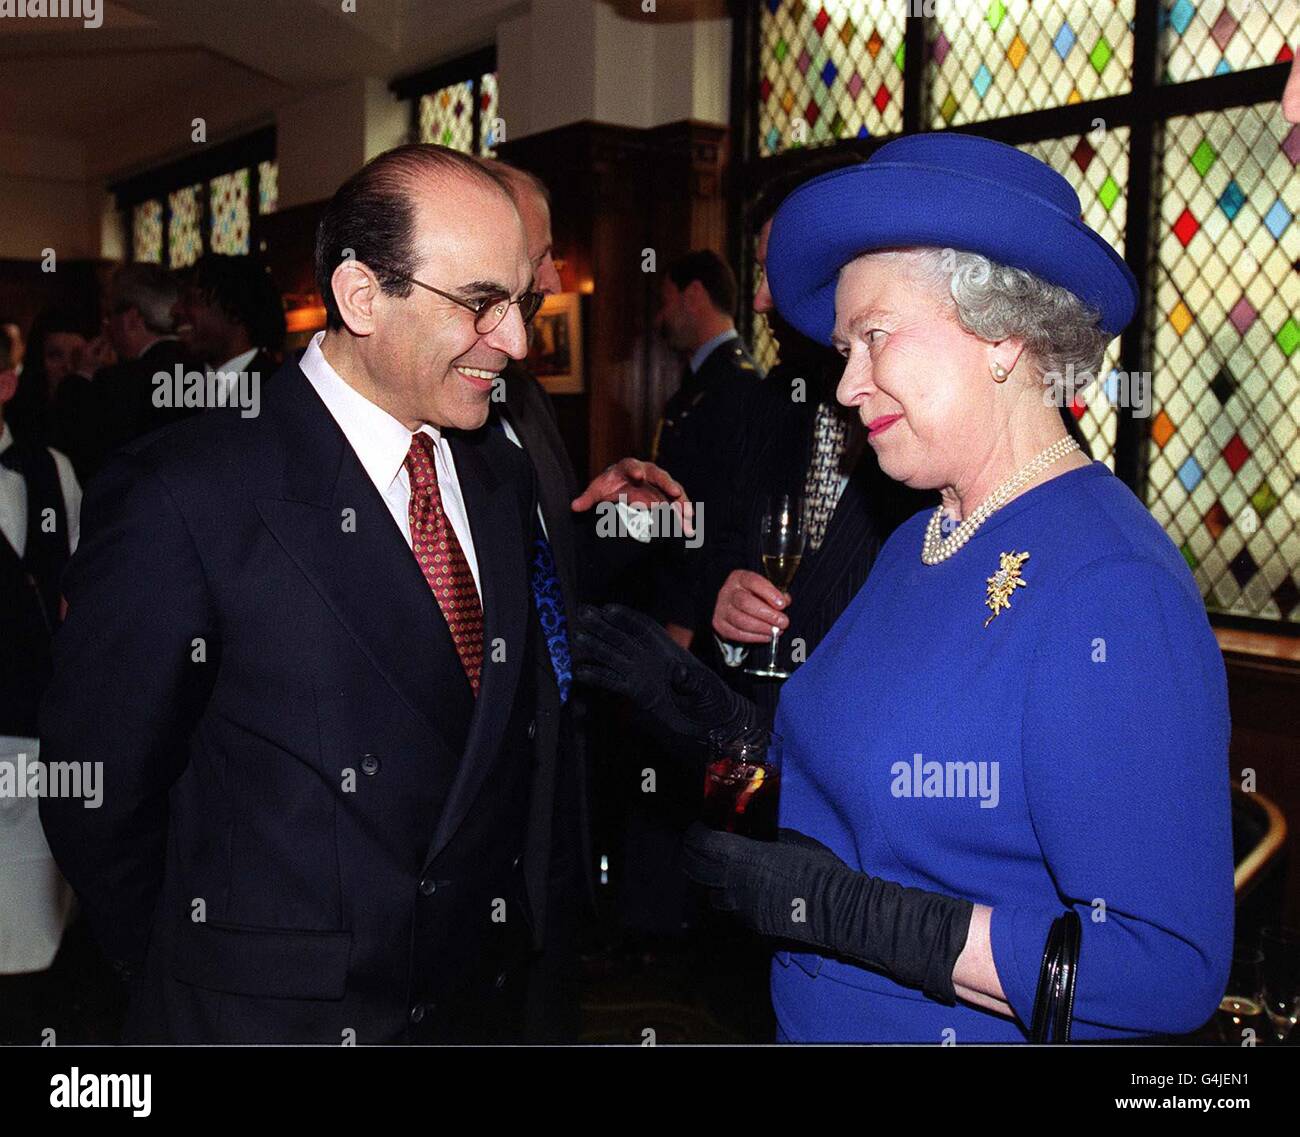 The Queen shares a joke with actor David Suchet during her visit to the Almeida Theatre in London, part of a tour by The Queen and the Duke to London's Theatreland. Stock Photo